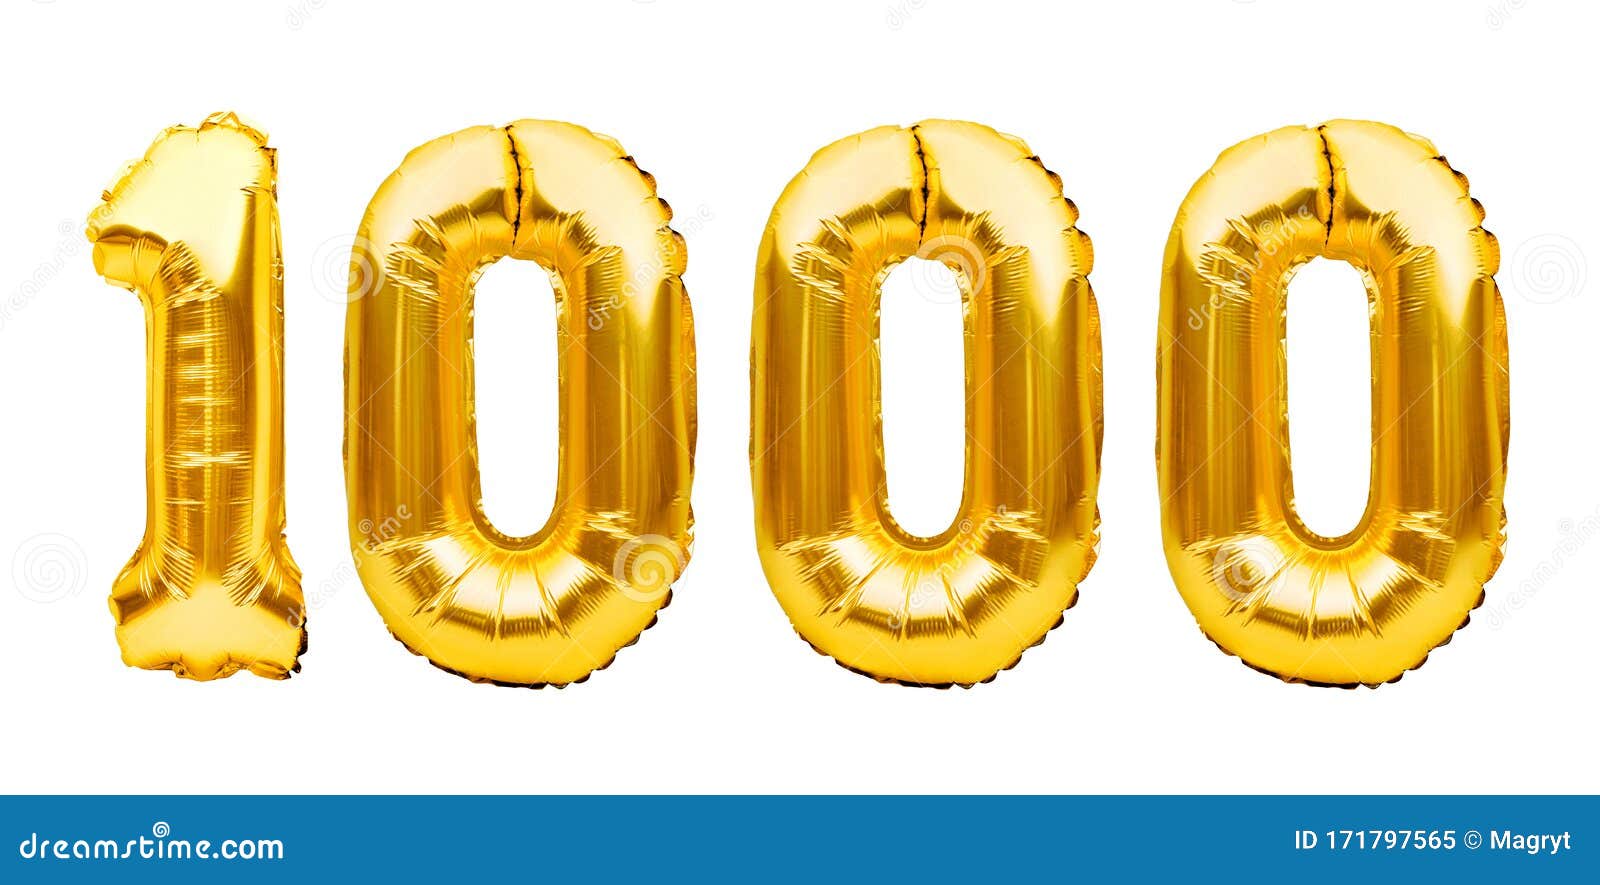 Number 1000 One Thousand Made Of Golden Inflatable Balloons